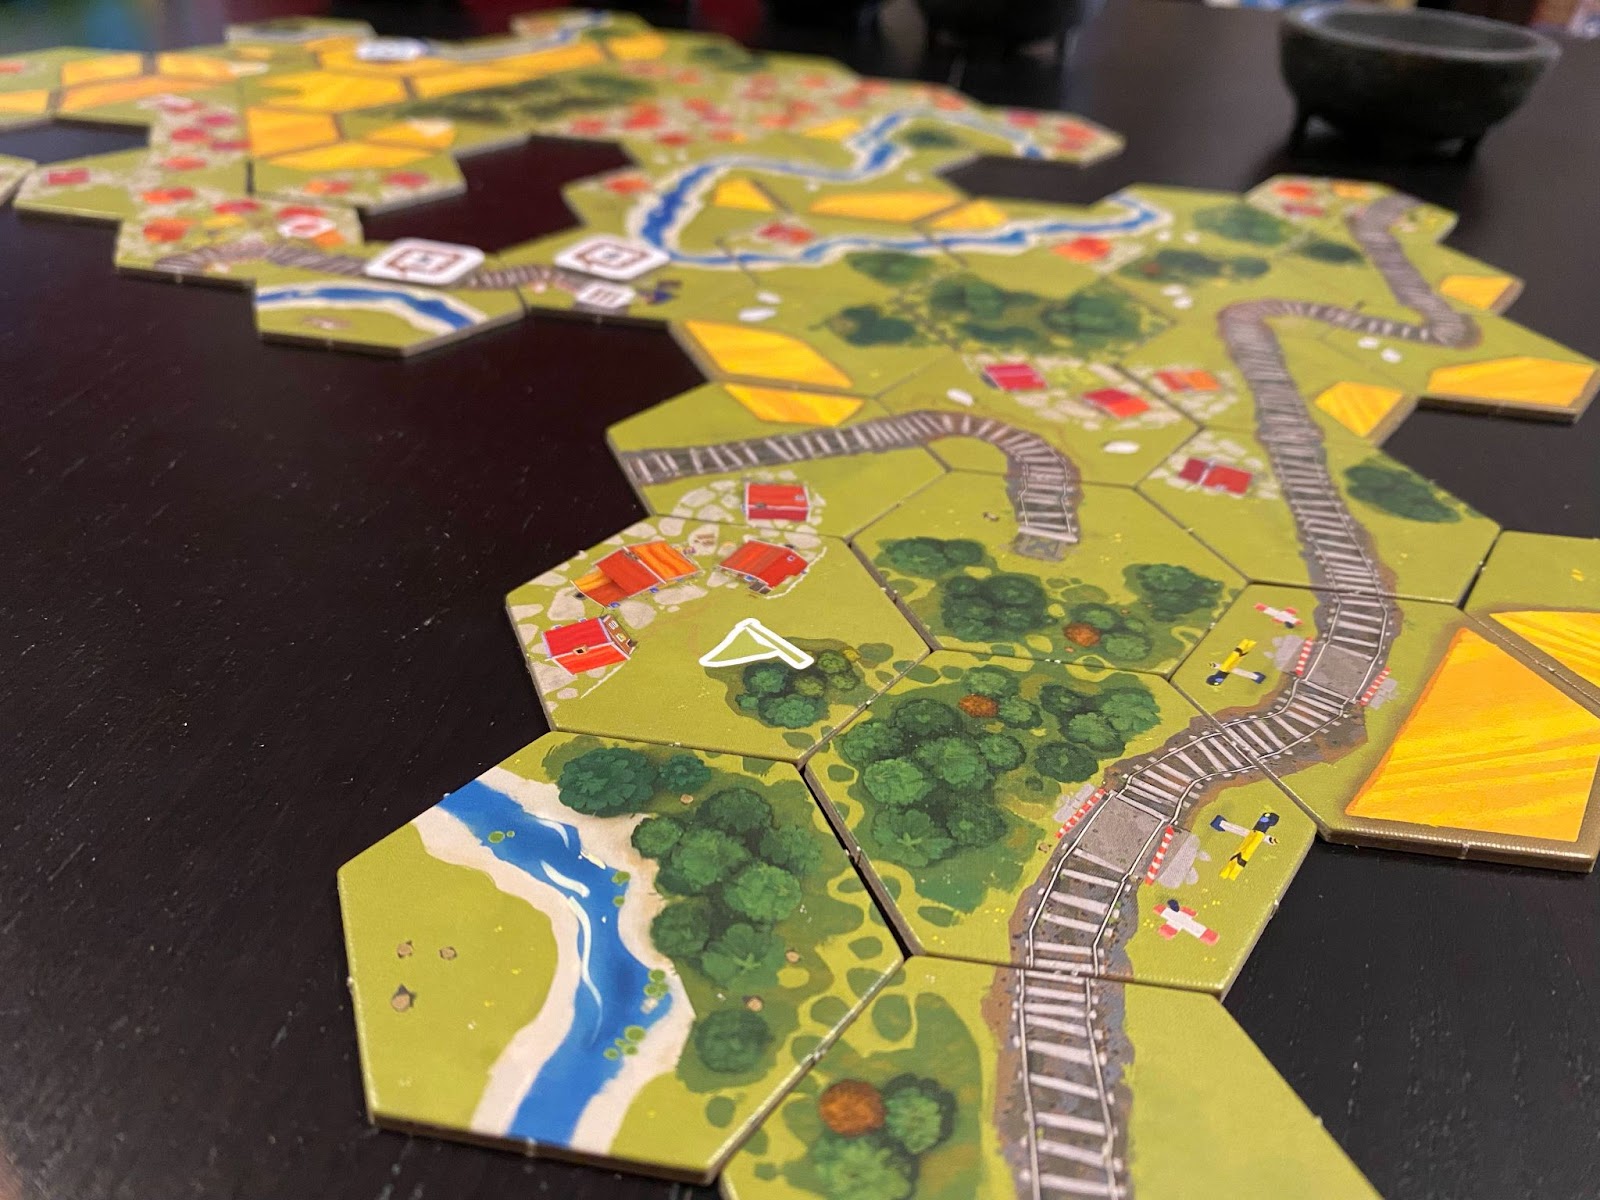 A picture of the Dorfromantik board game:  hexagonal tiles with forests, train tracks, villages and fields connected on a black table.